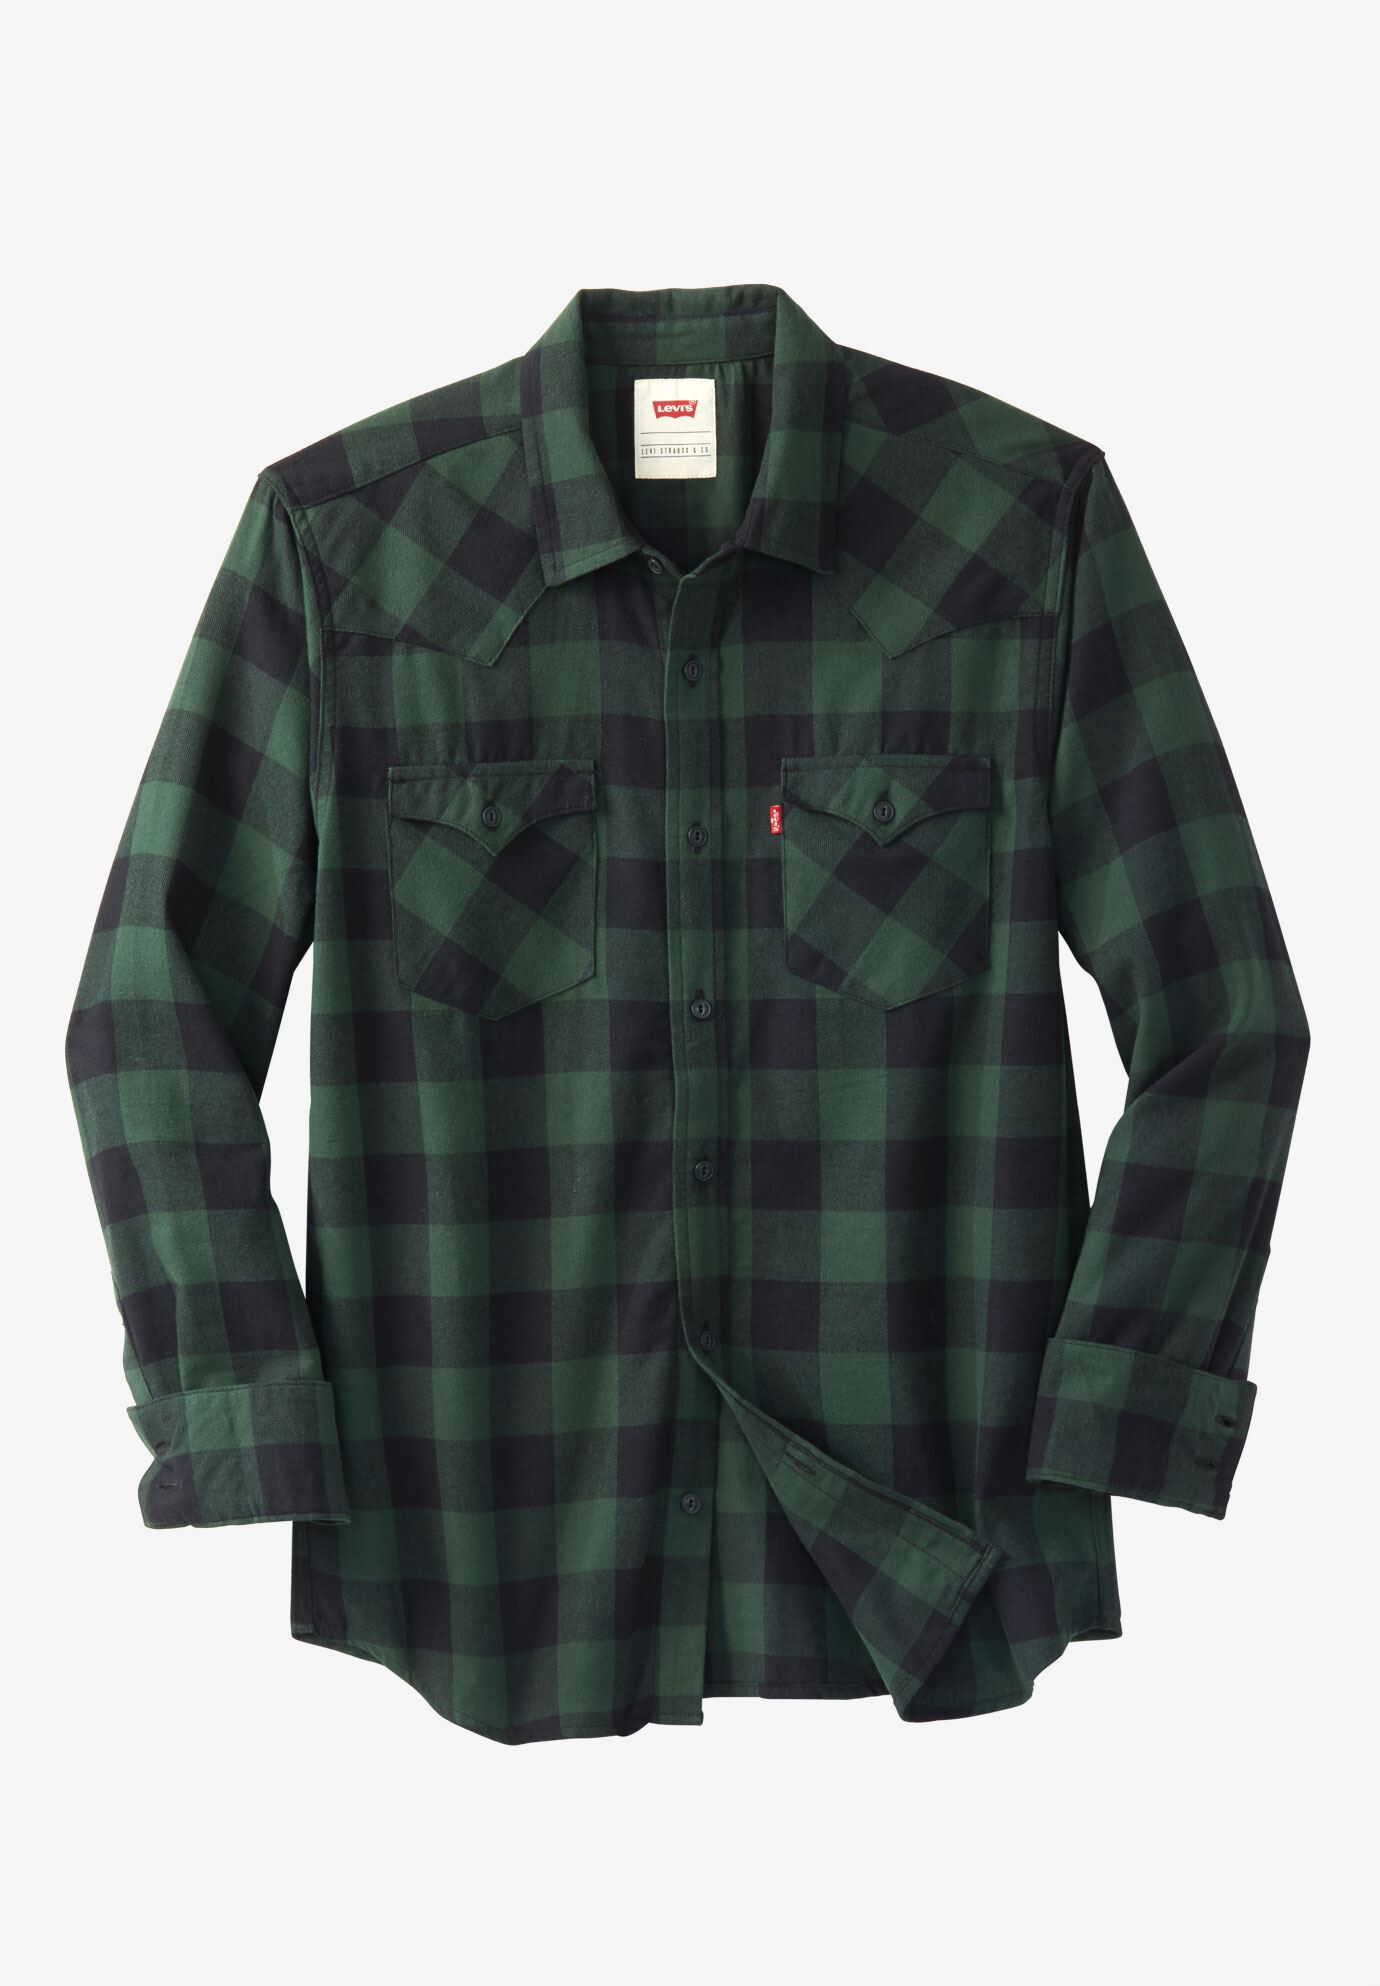 levi's flannel